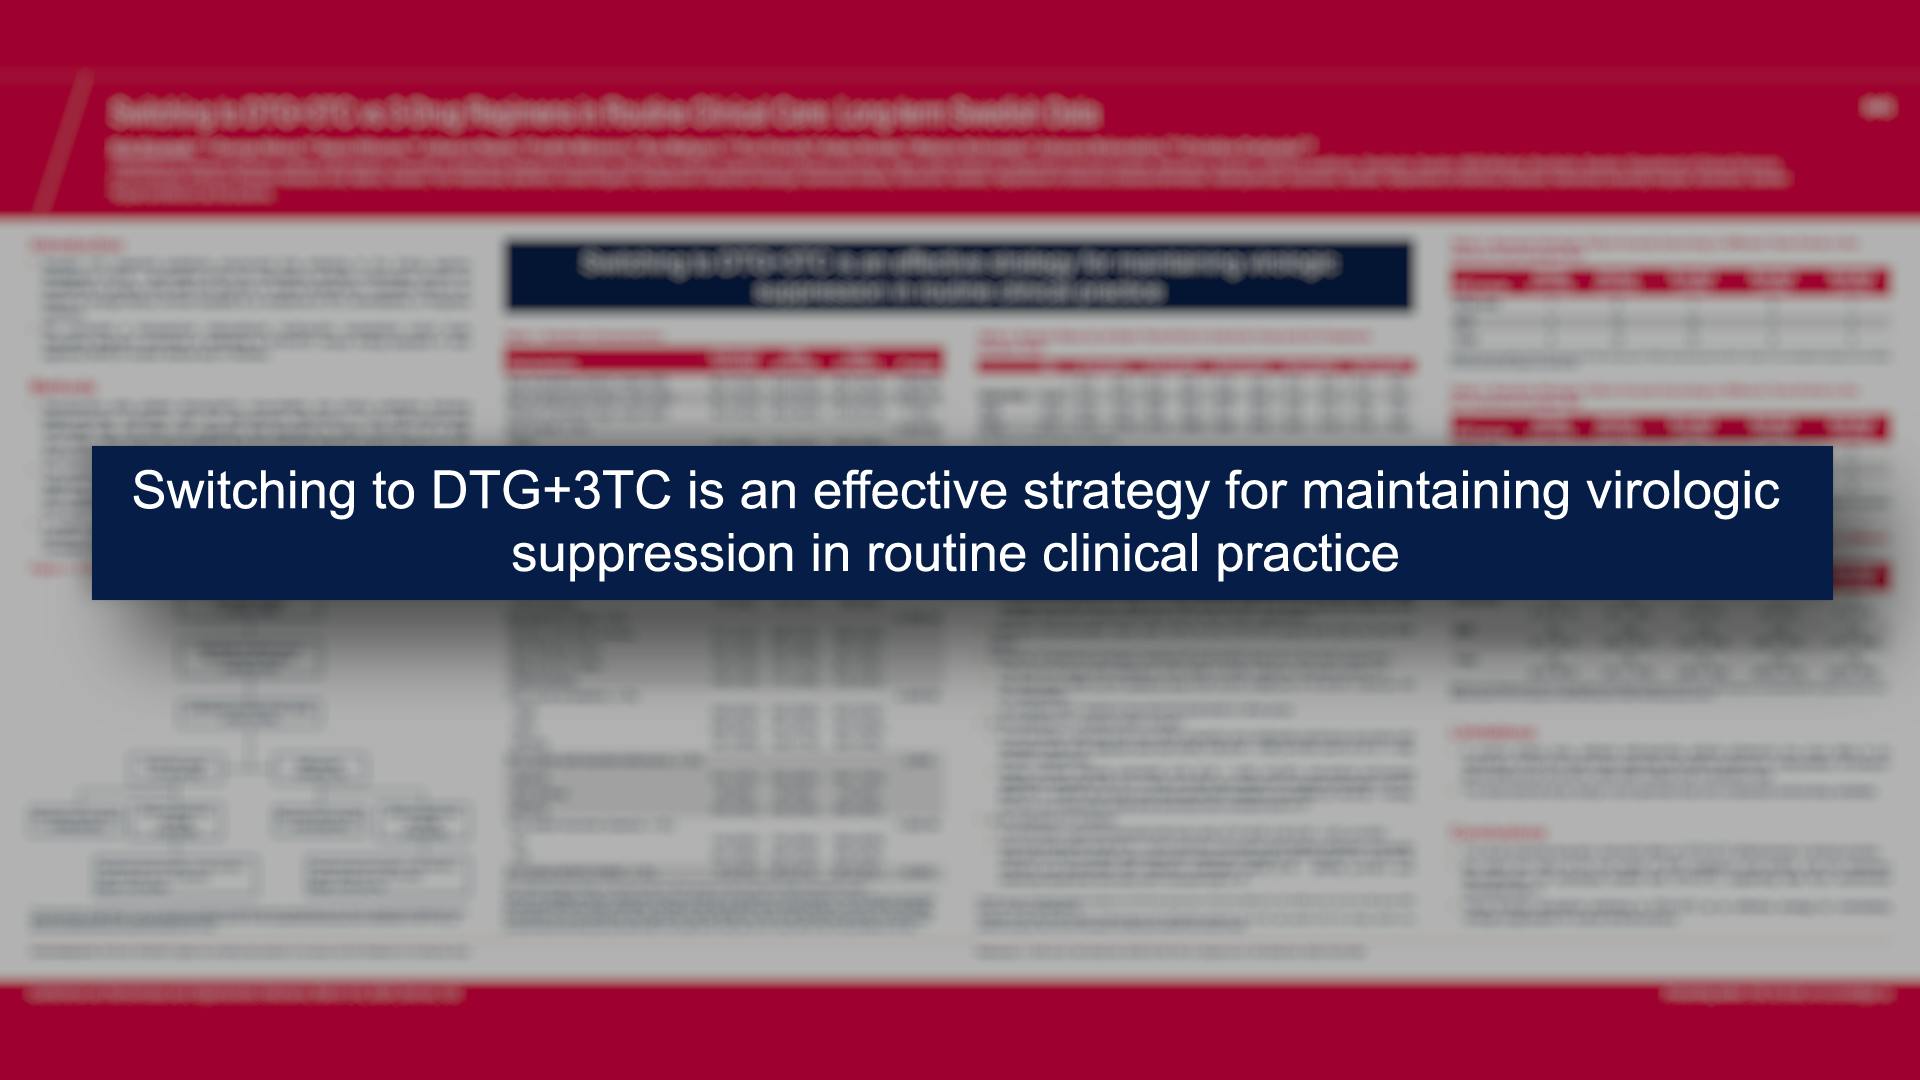 Switching to DTG+3TC is an effective strategy for maintaining virologic suppression in routine clinical practice